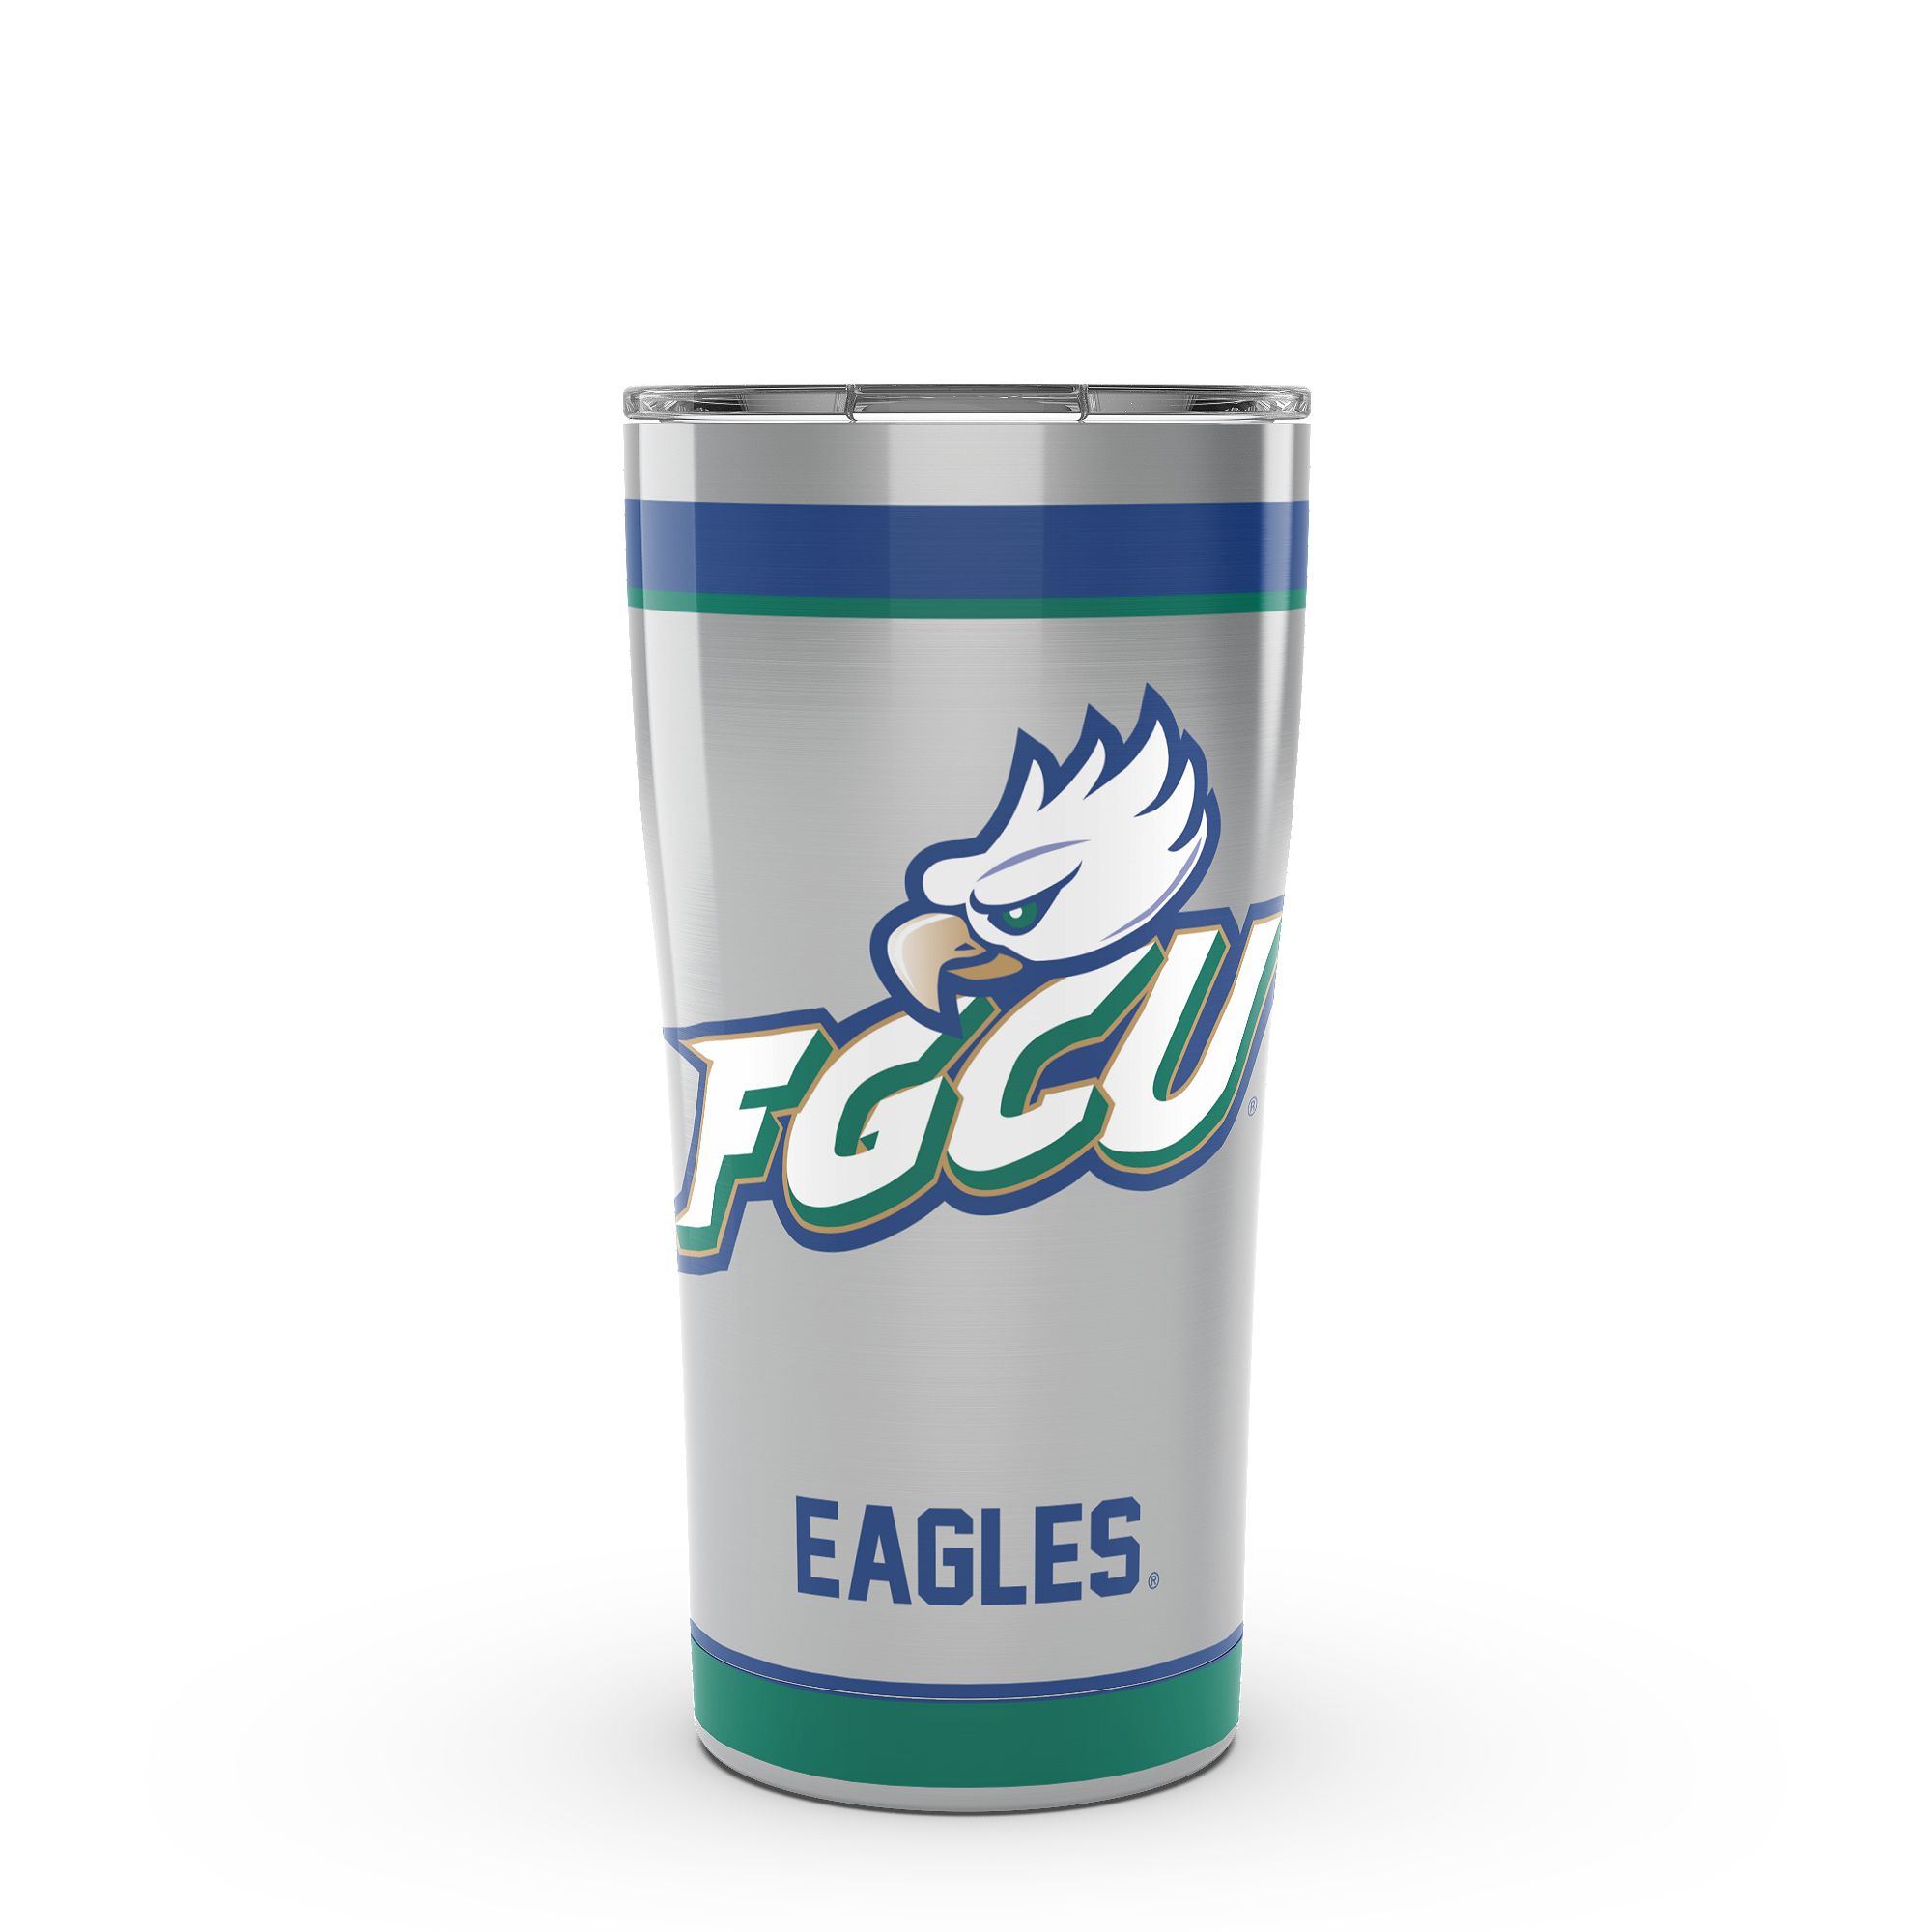 Tervis Florida Gulf Coast University Tradition 20 oz. Stainless Steel Tumbler with Lid, Silver